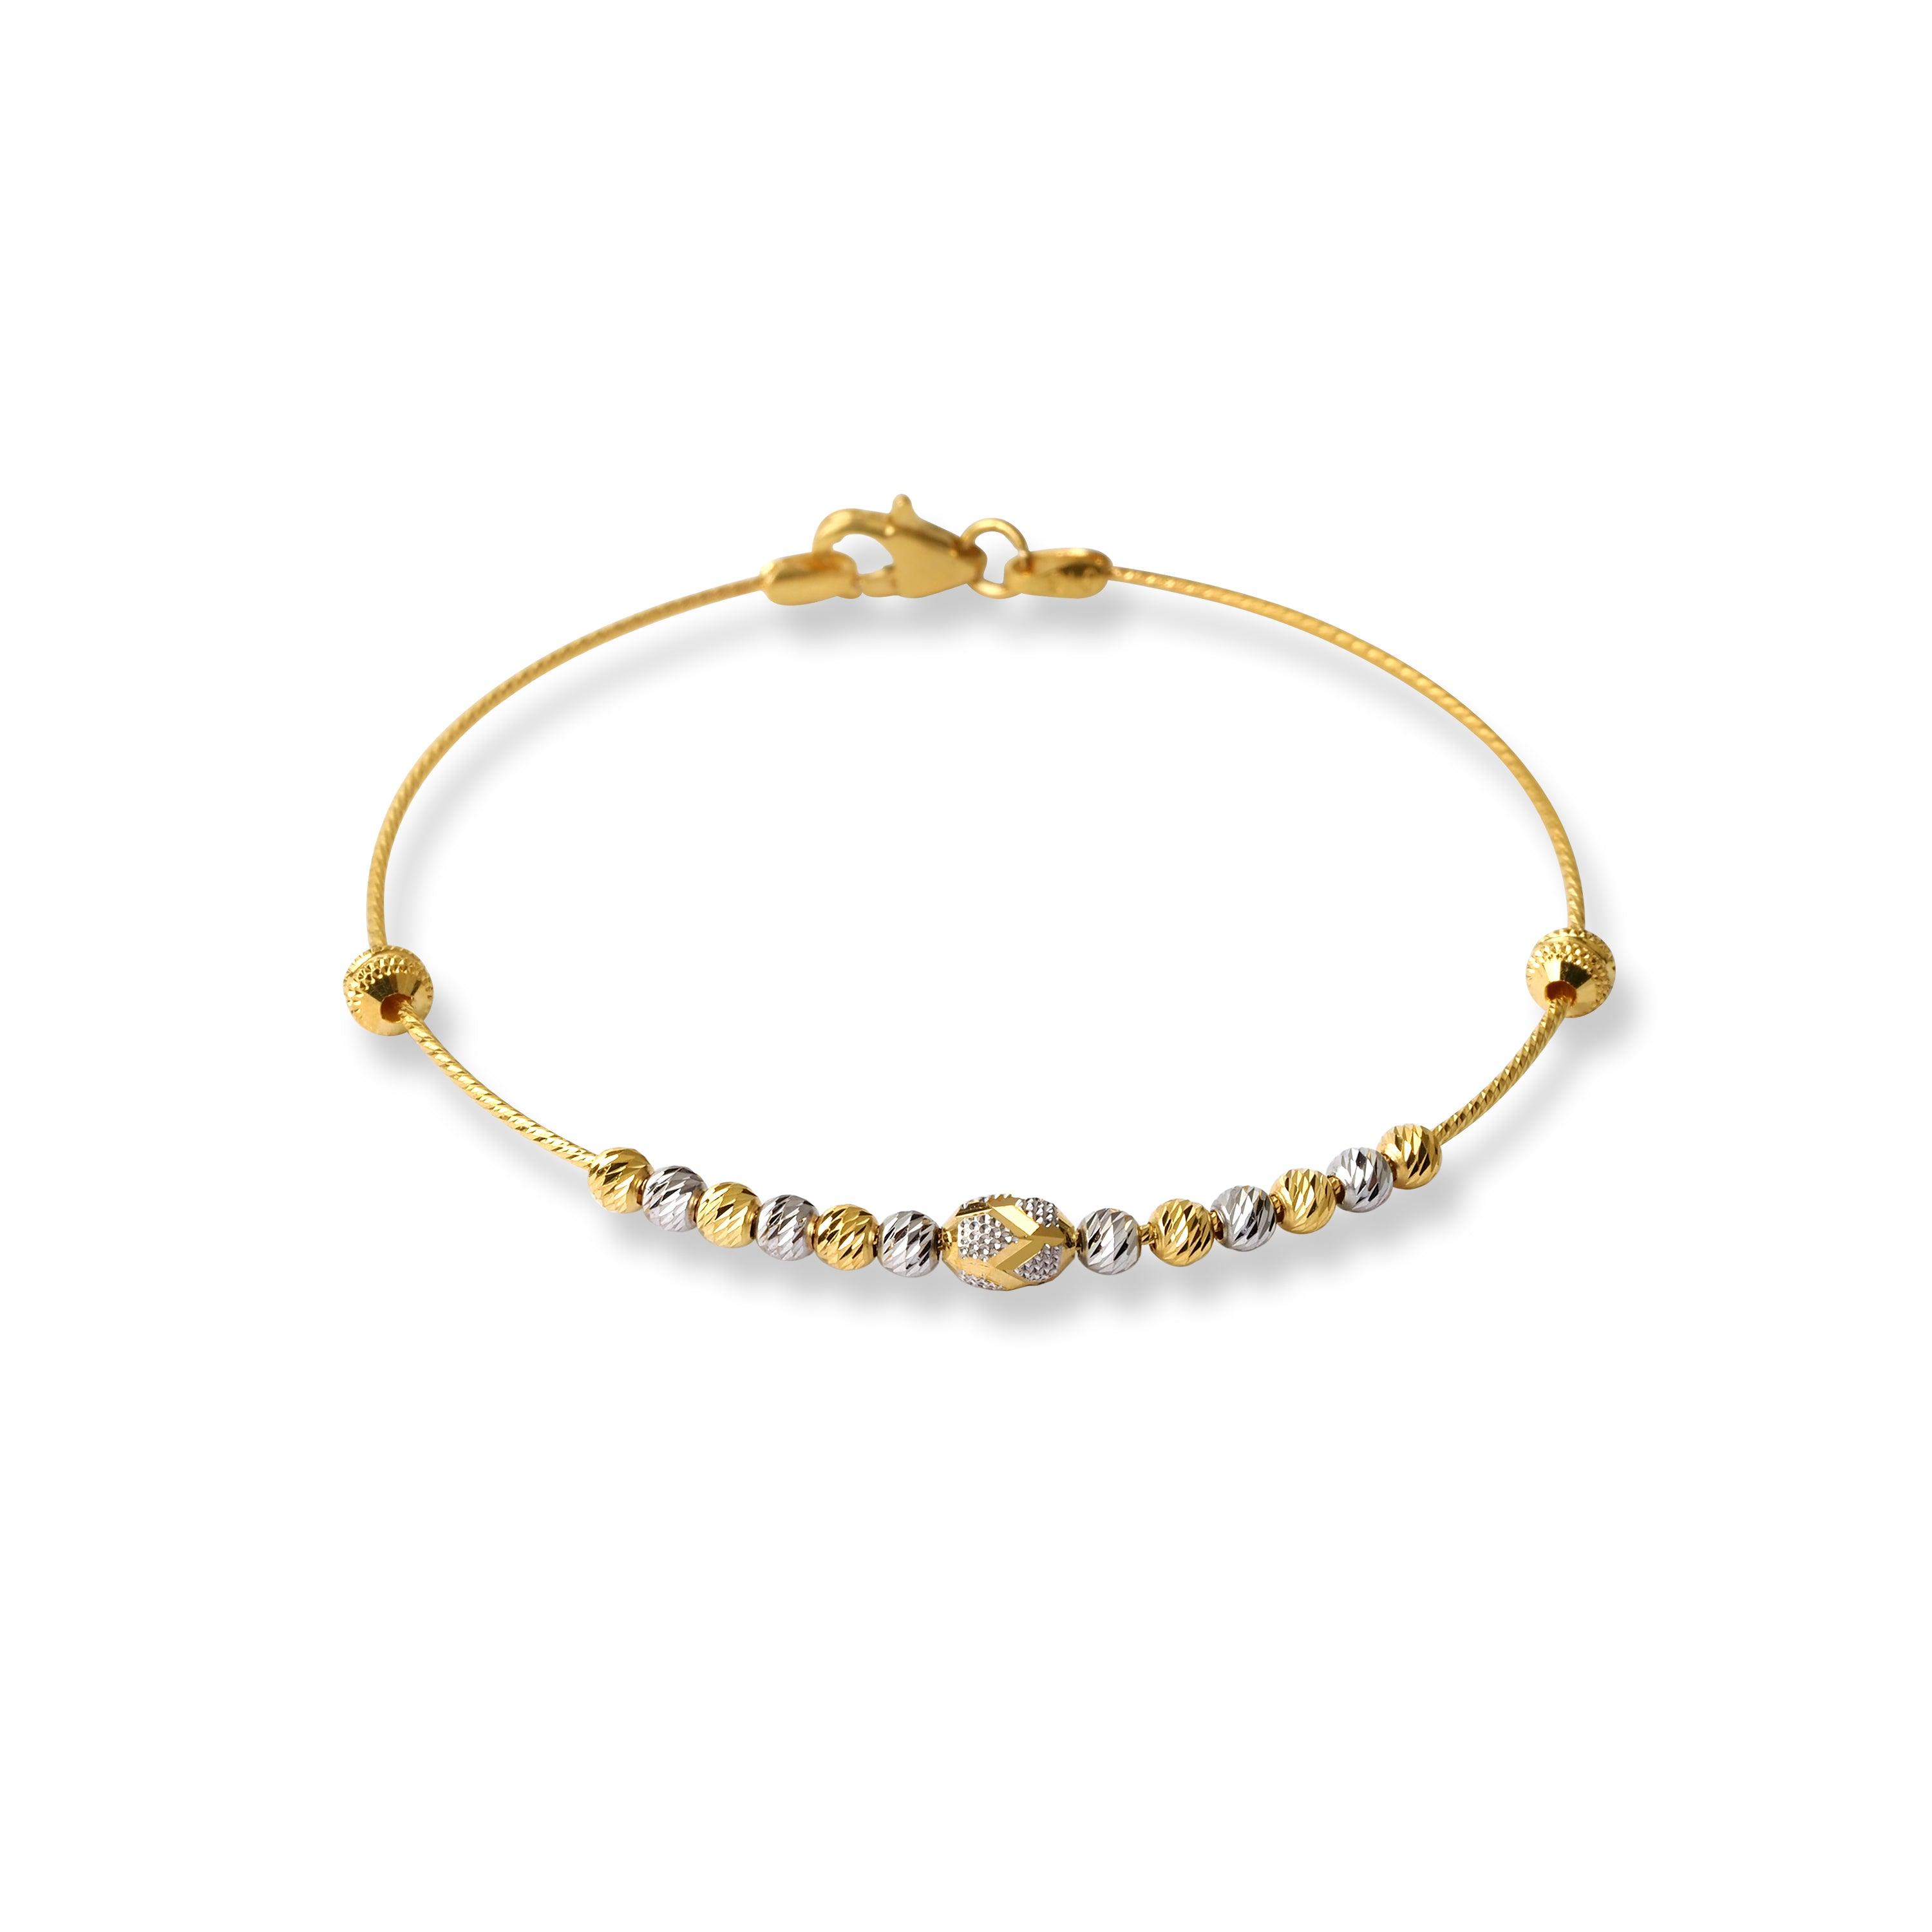 22ct Gold Rhodium Plated Beads Bangle With Rounded Trigger Clasp (4.4g) B-8533 - Minar Jewellers